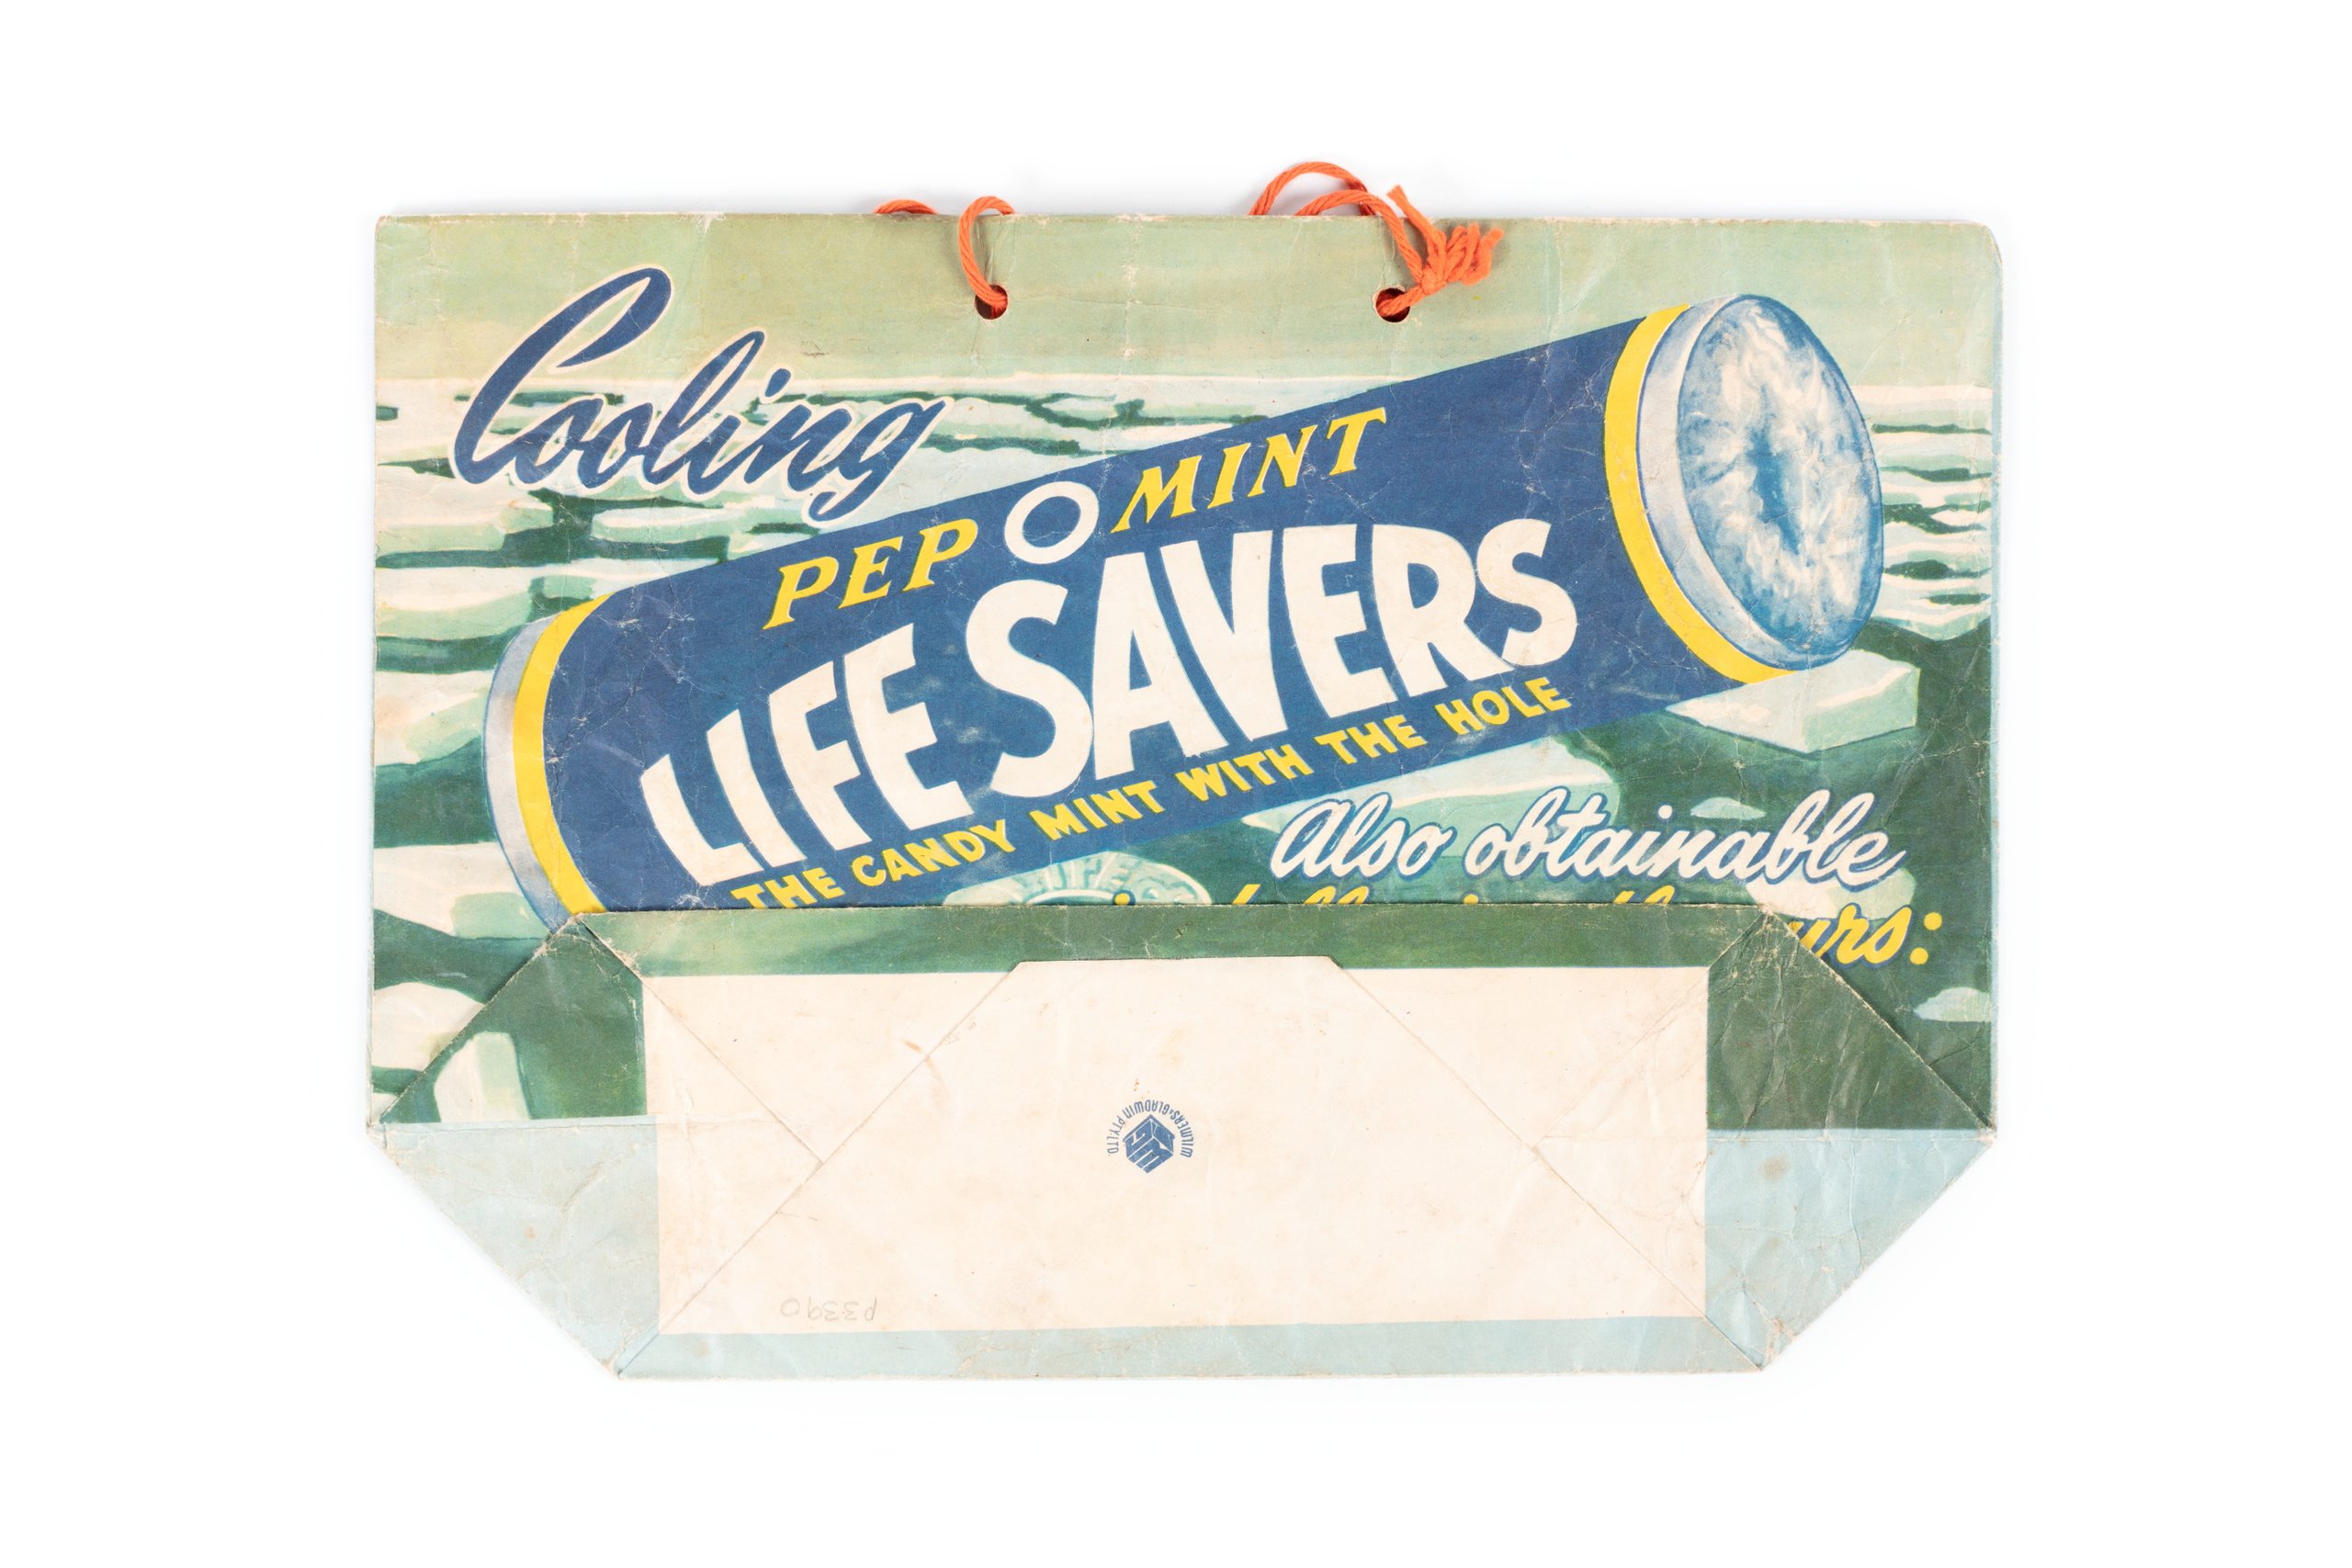 'Lifesavers' showbag from the Sydney Royal Easter Show